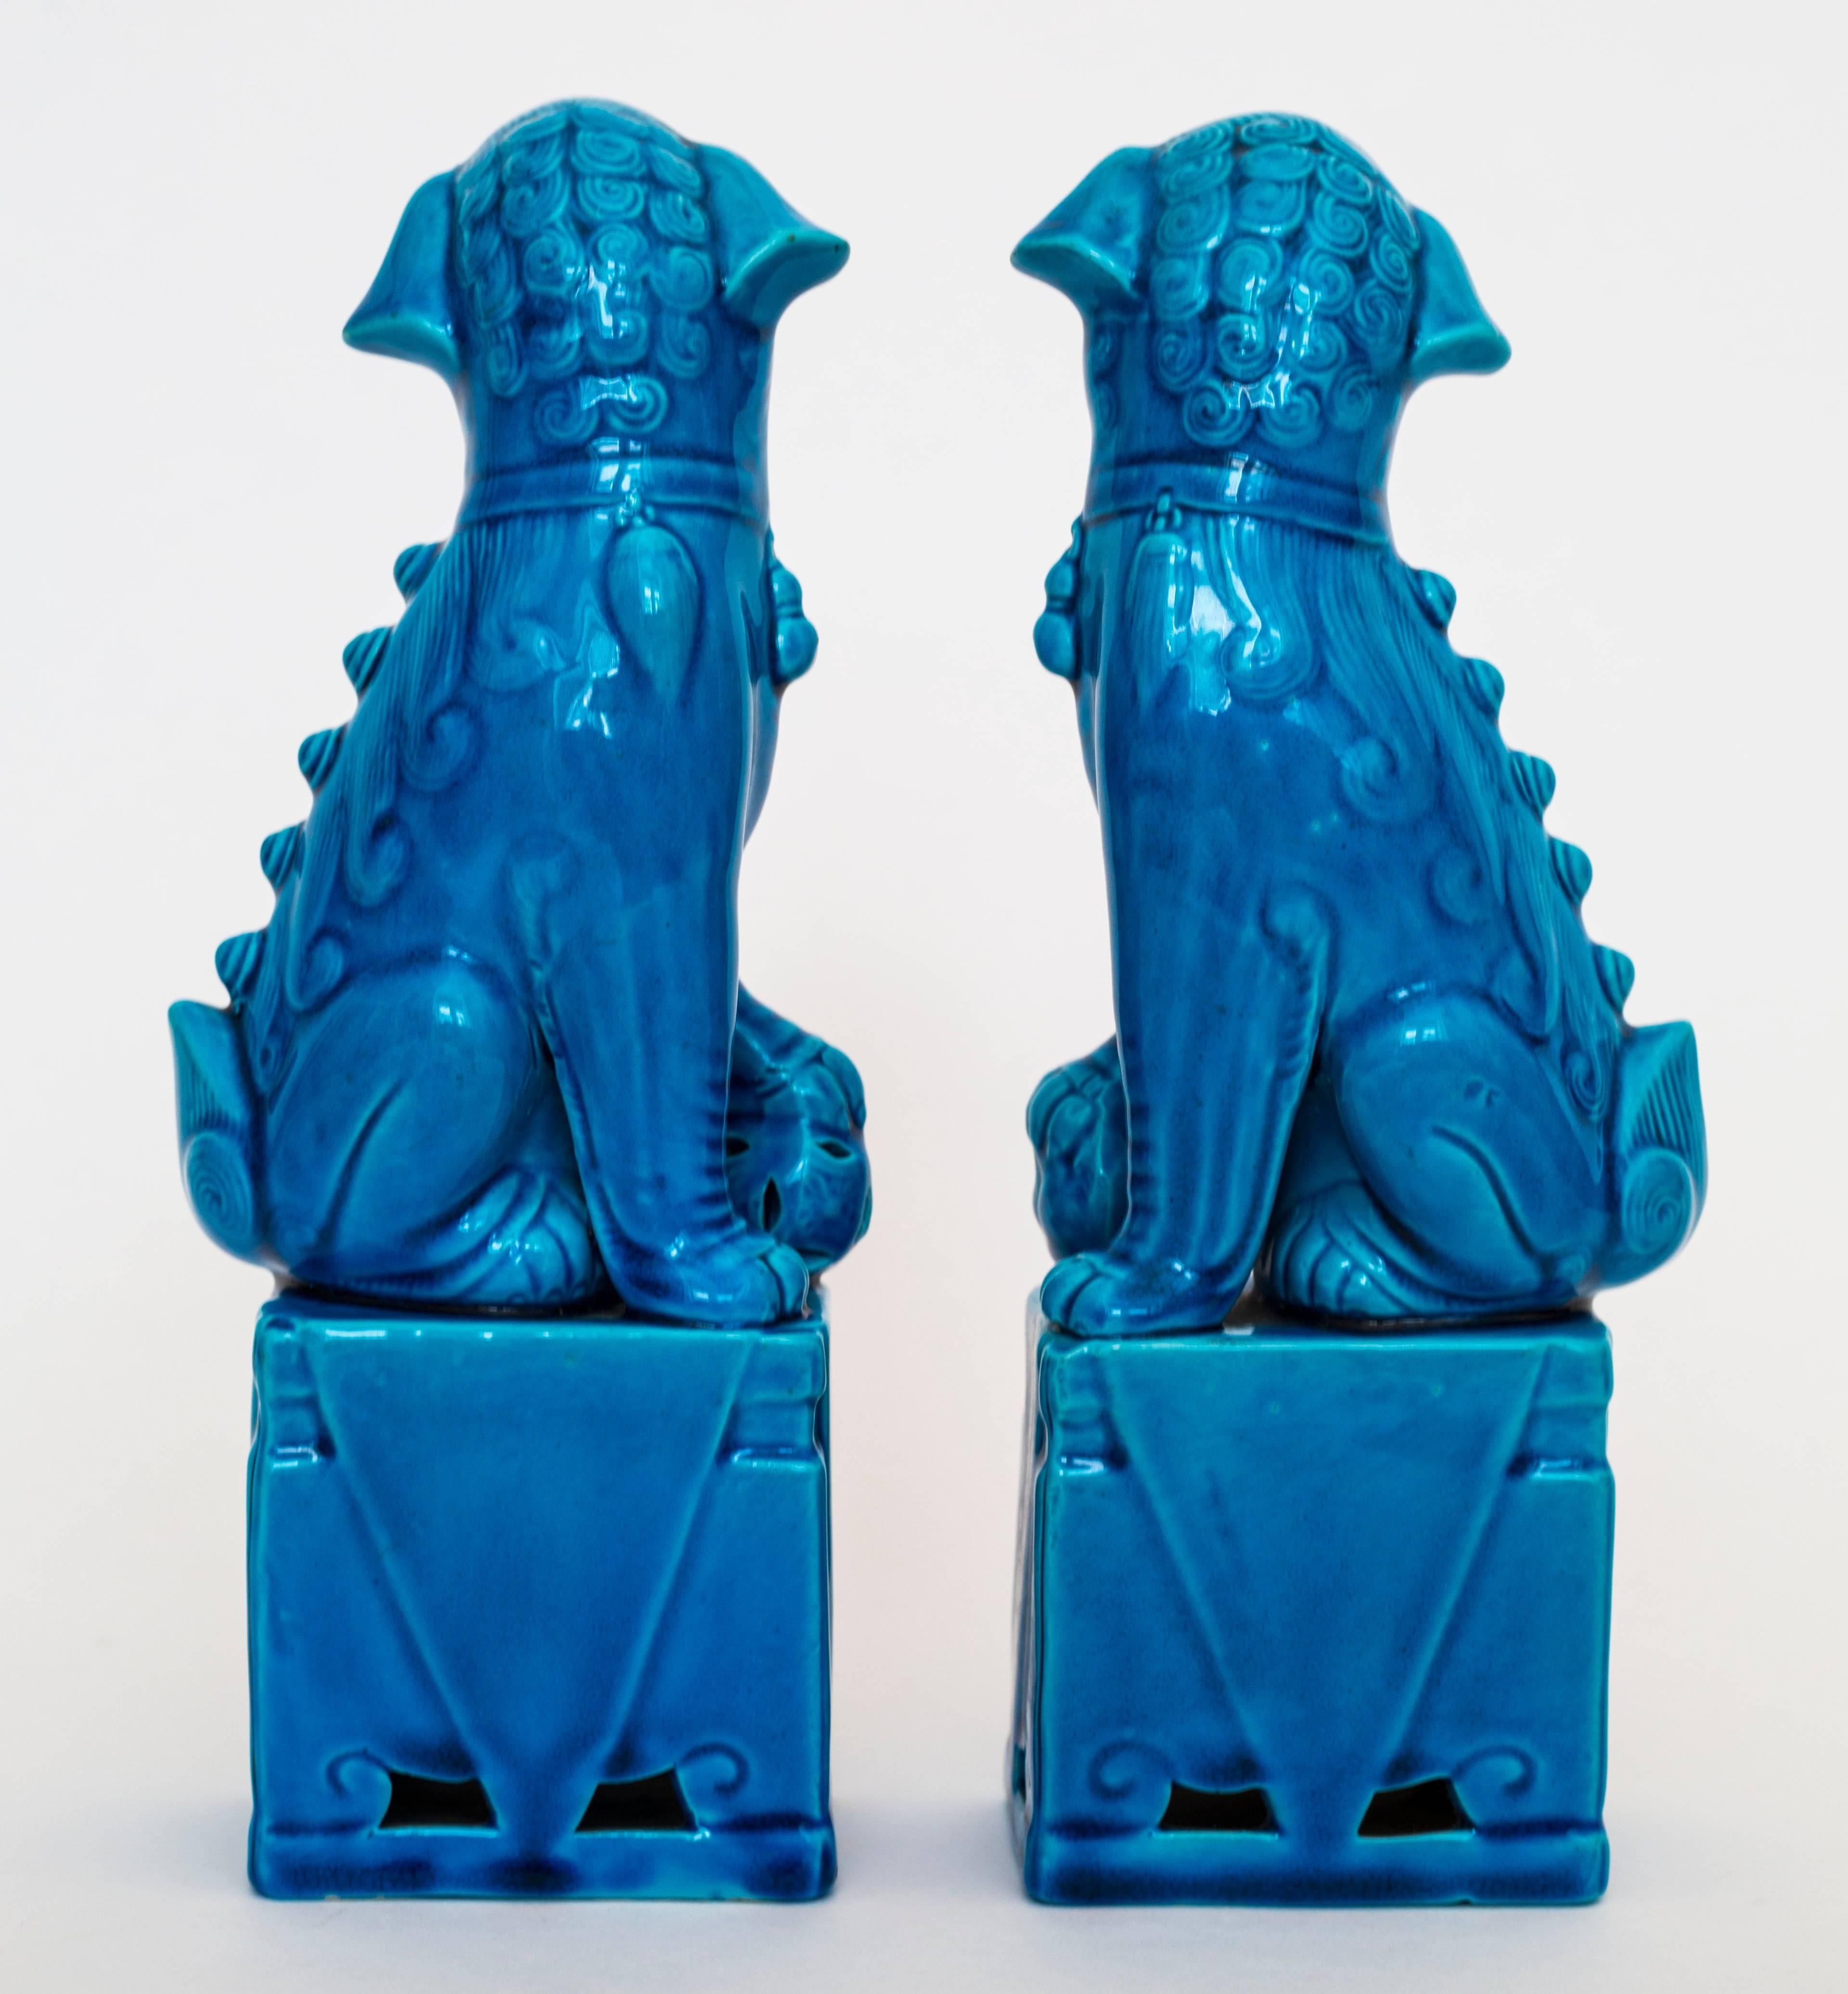 Lovely pair of vintage Chinese guardian or imperial lions or, as more commonly known in the West, foo dogs. In Chinese they are simply called 